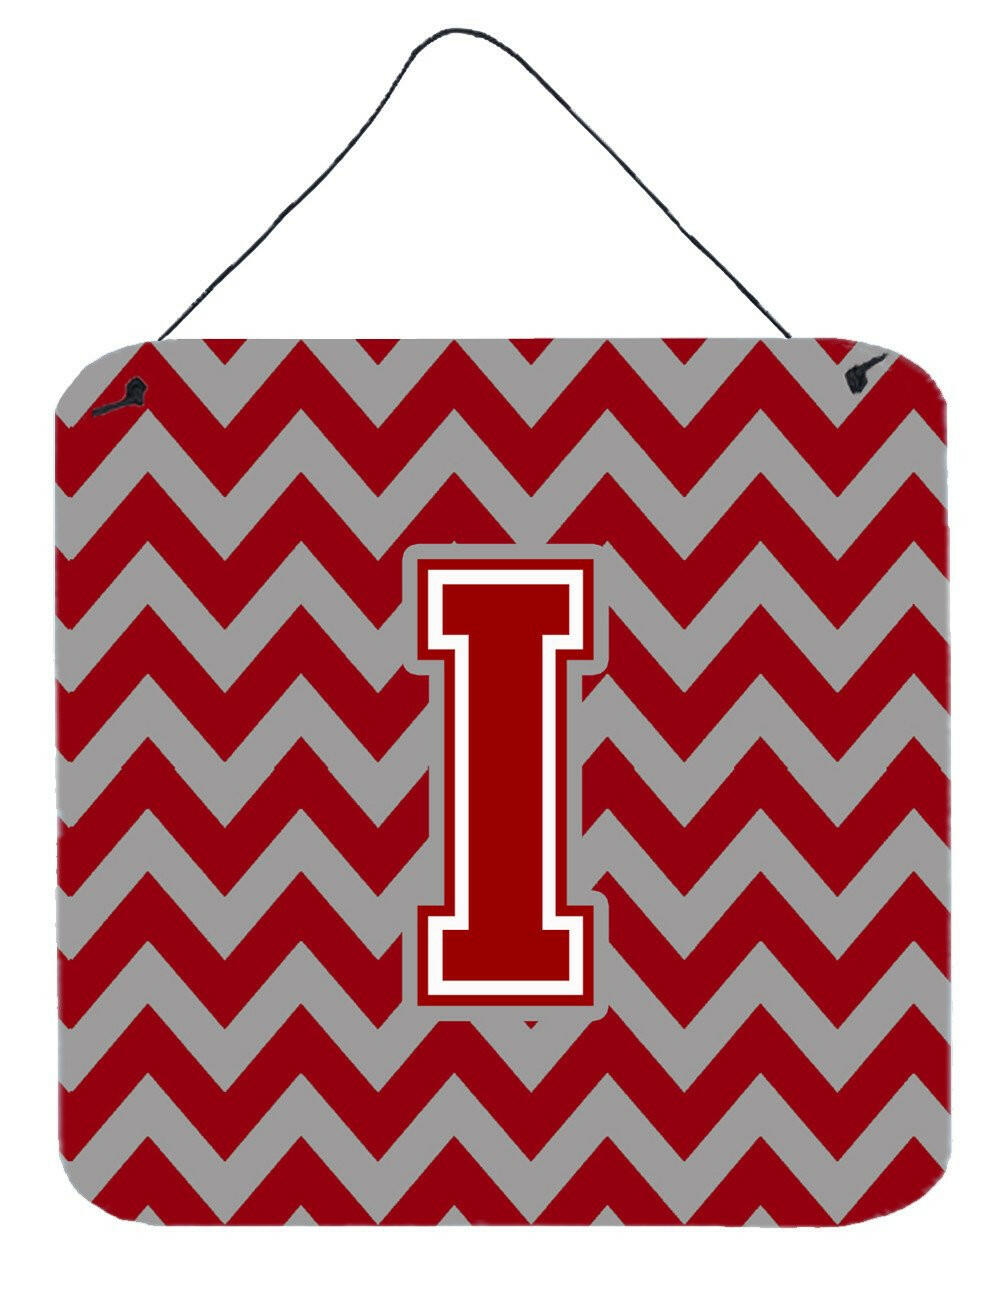 Letter I Chevron Maroon and White Wall or Door Hanging Prints CJ1049-IDS66 by Caroline's Treasures